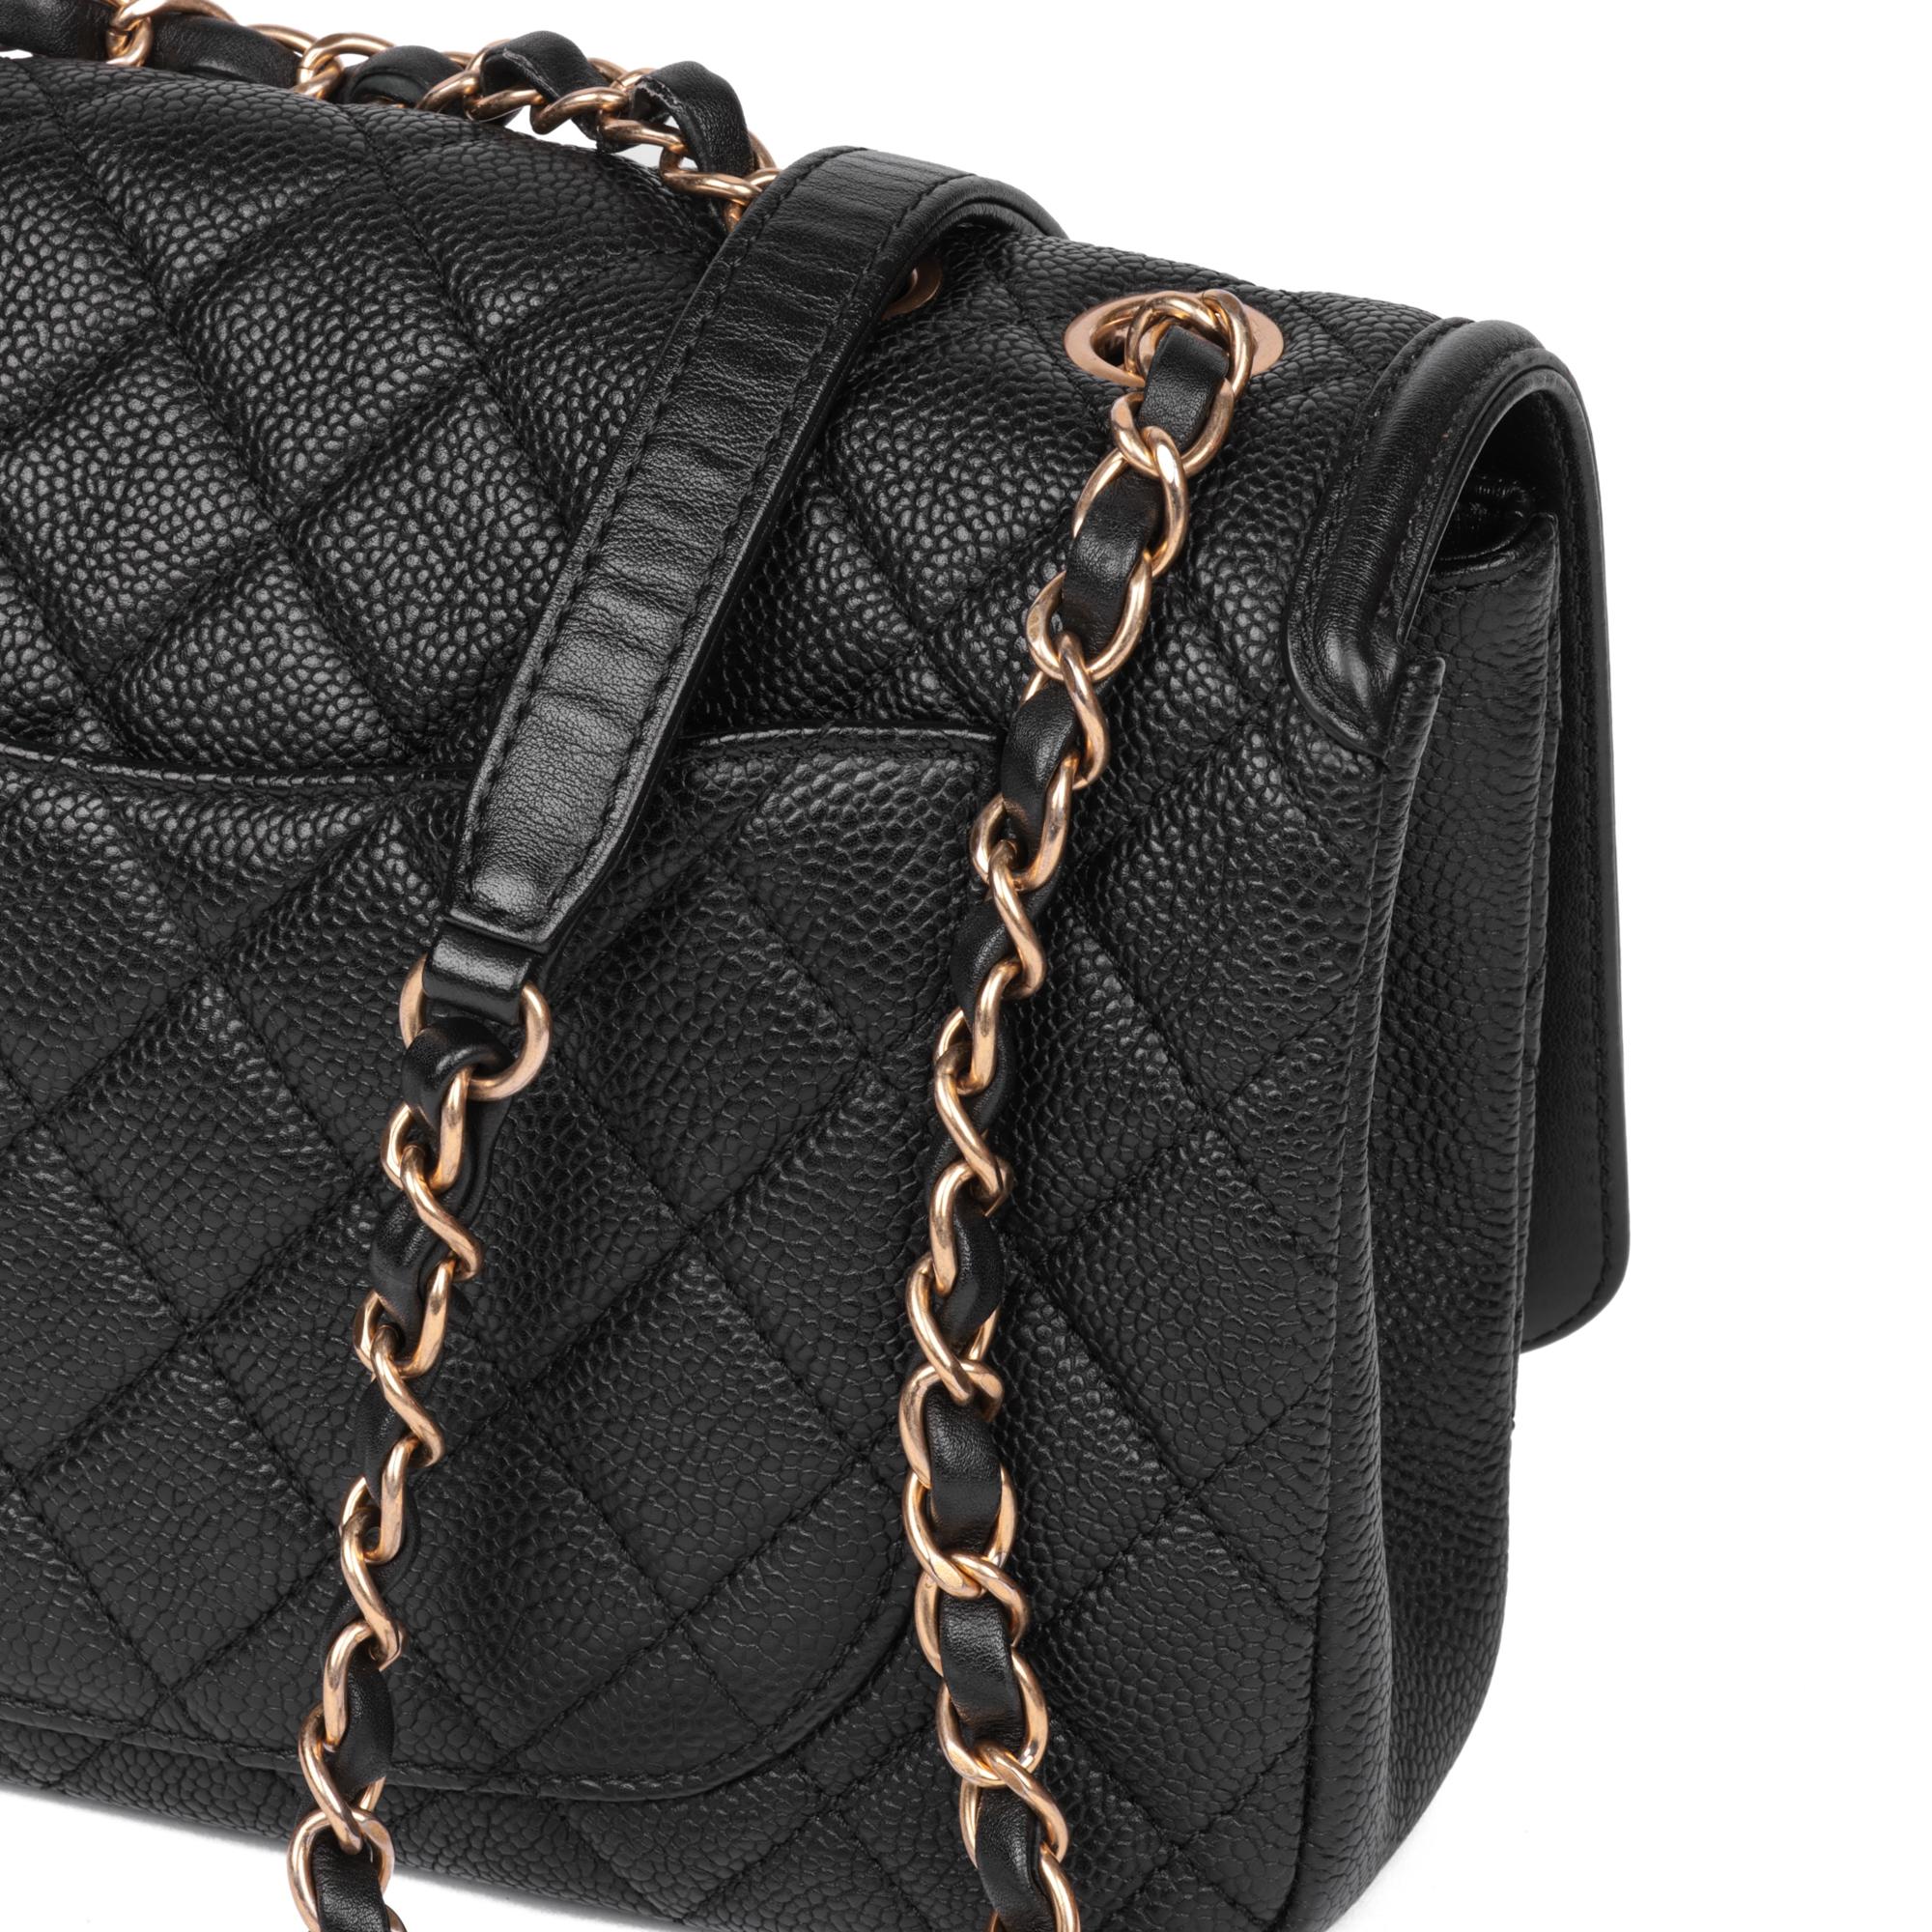 CHANEL Black Quilted Caviar Leather Medium Filigree Flap Bag For Sale 1